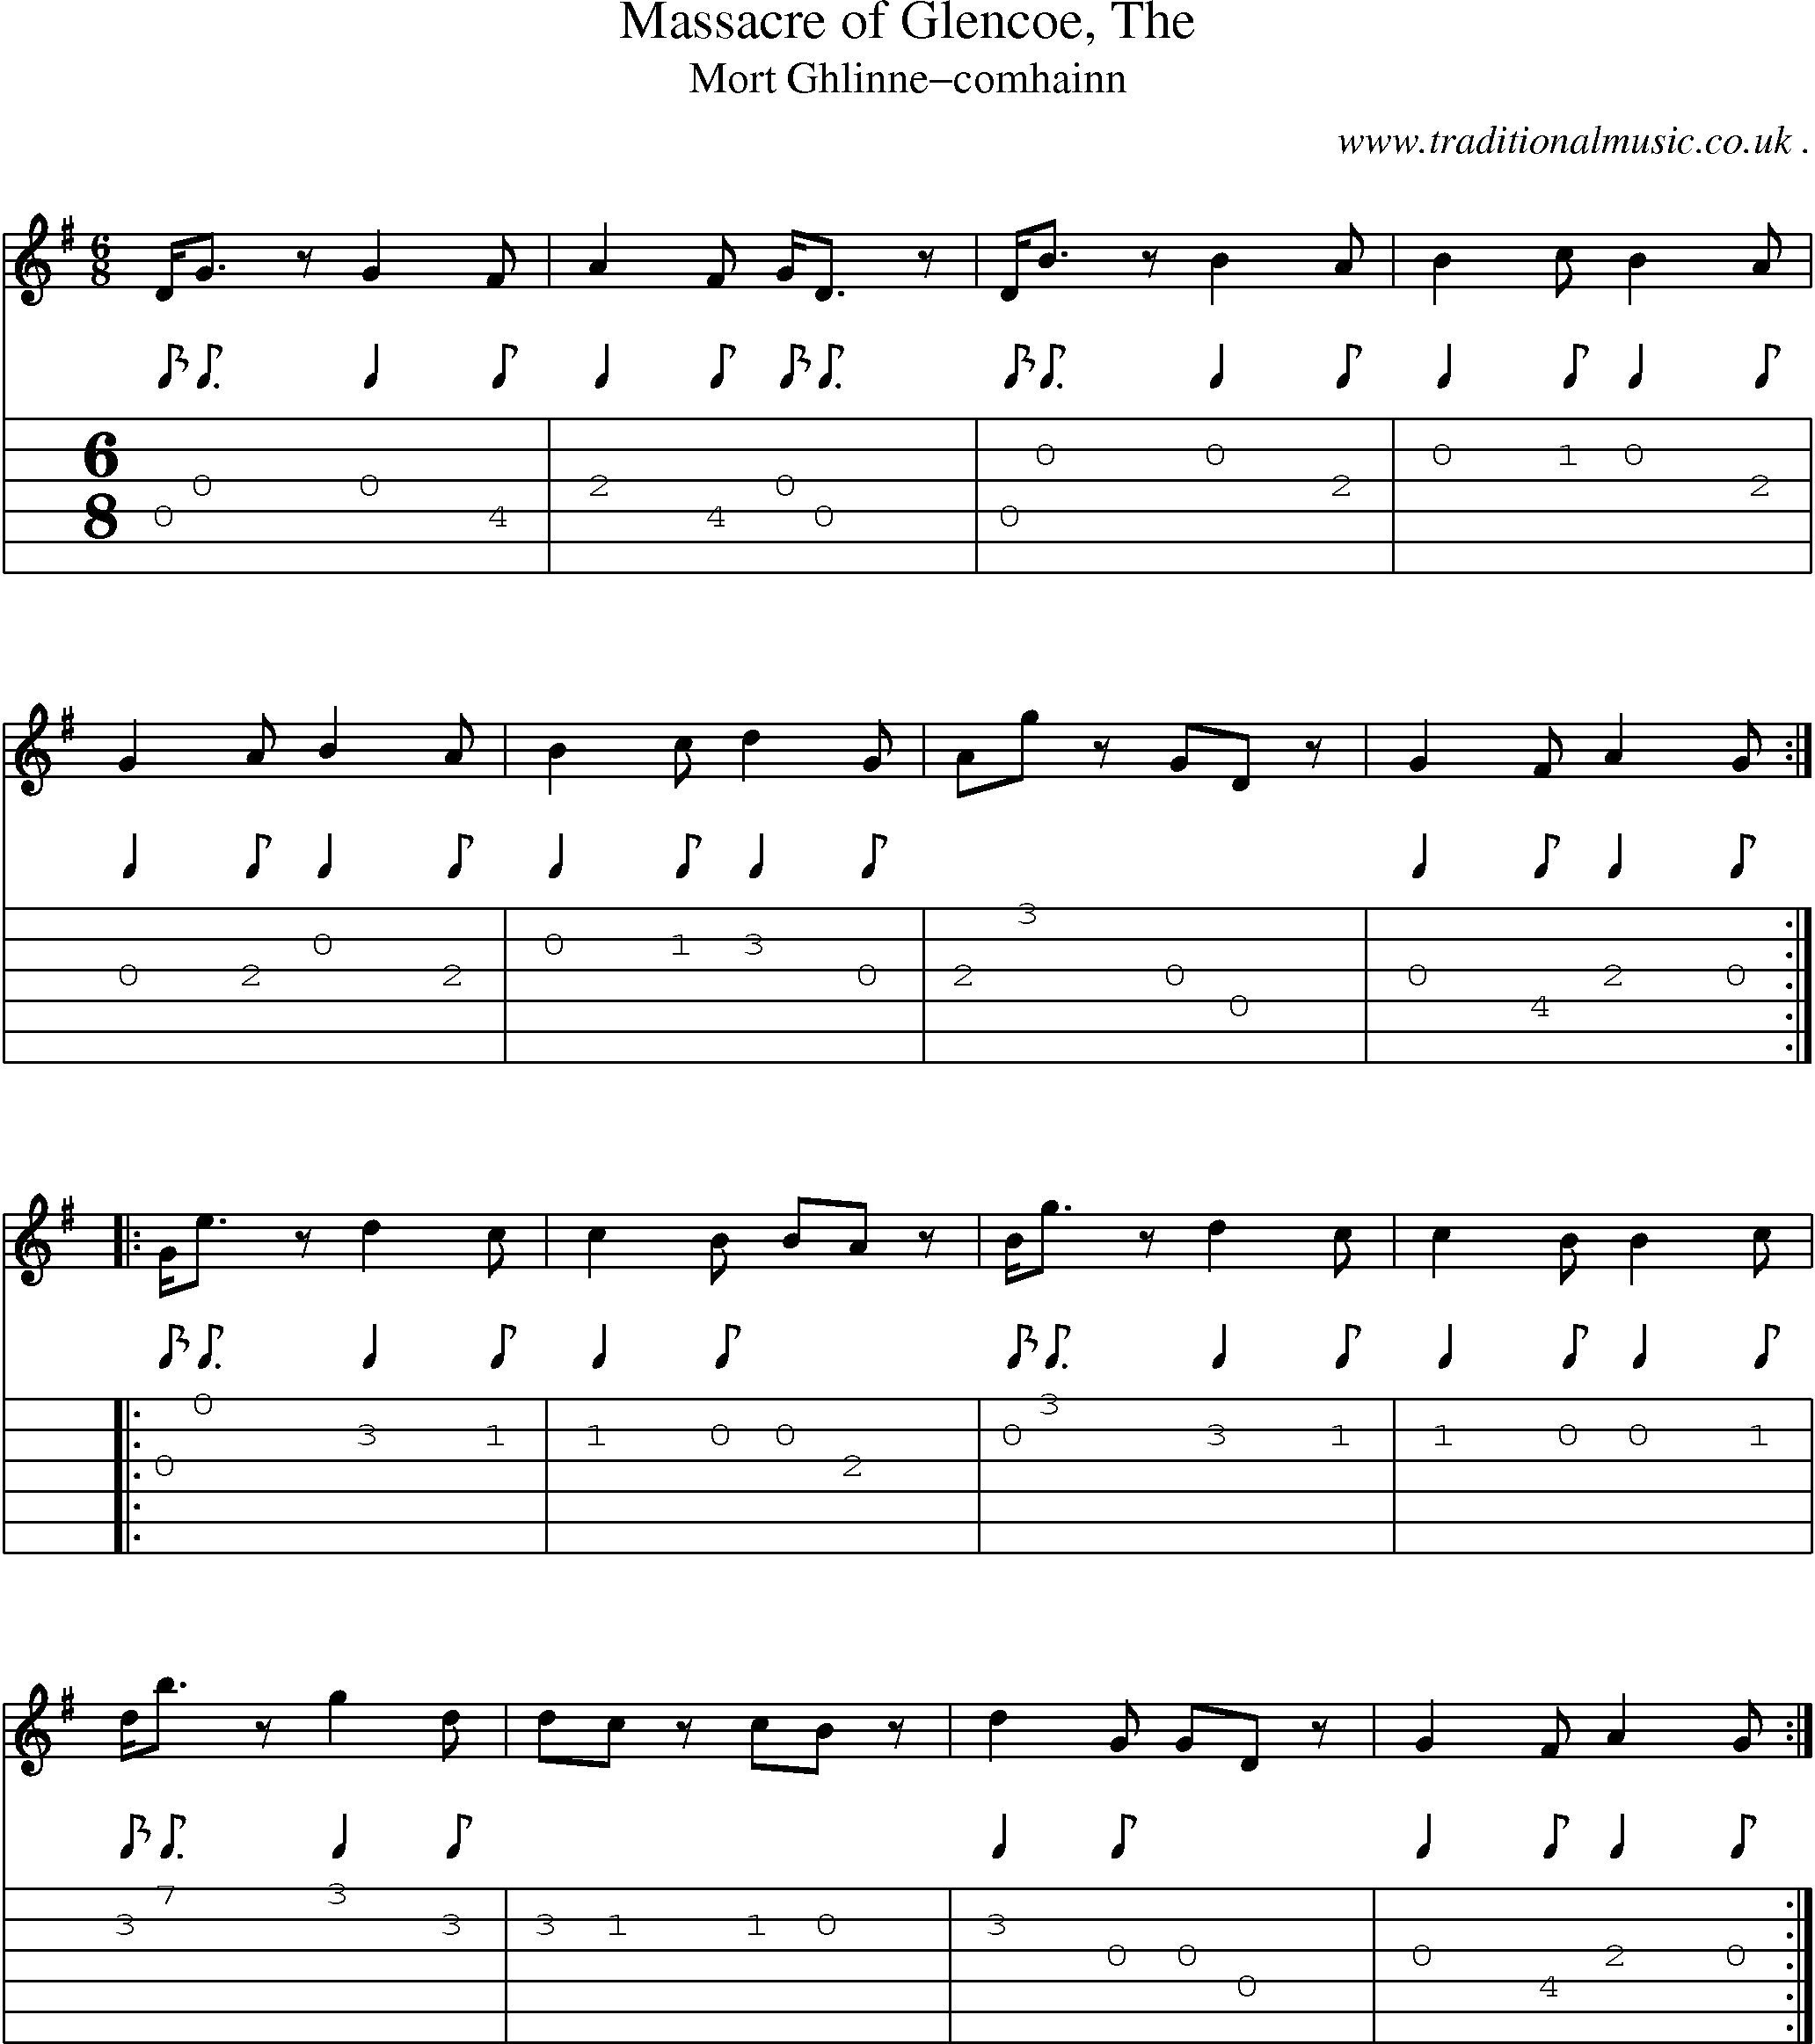 Sheet-music  score, Chords and Guitar Tabs for Massacre Of Glencoe The